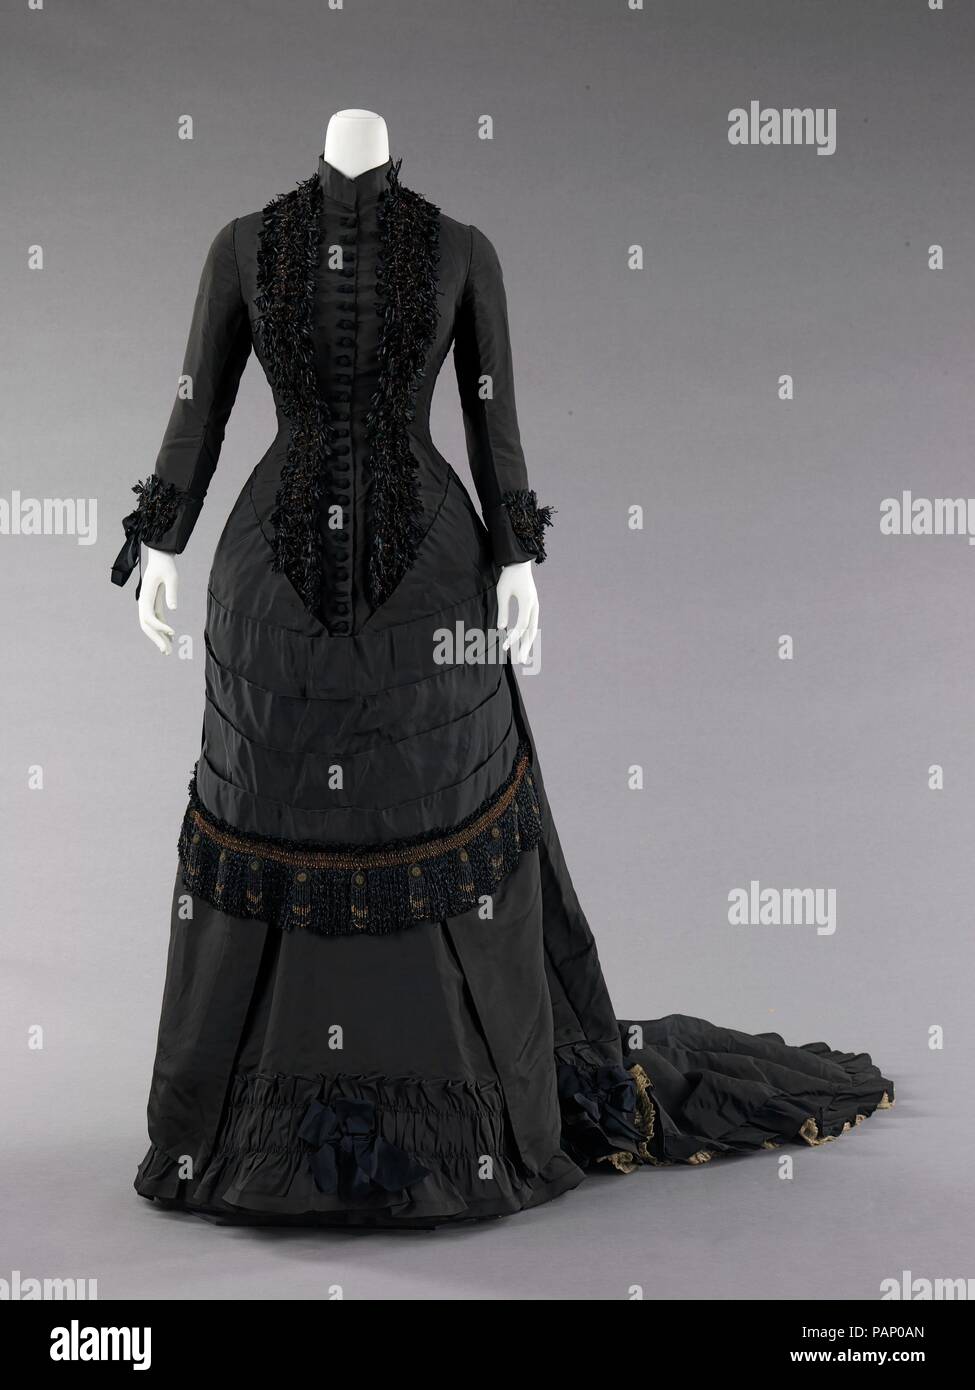 Dinner dress. Culture: Spanish. Date: 1880. The bustle silhouette ...